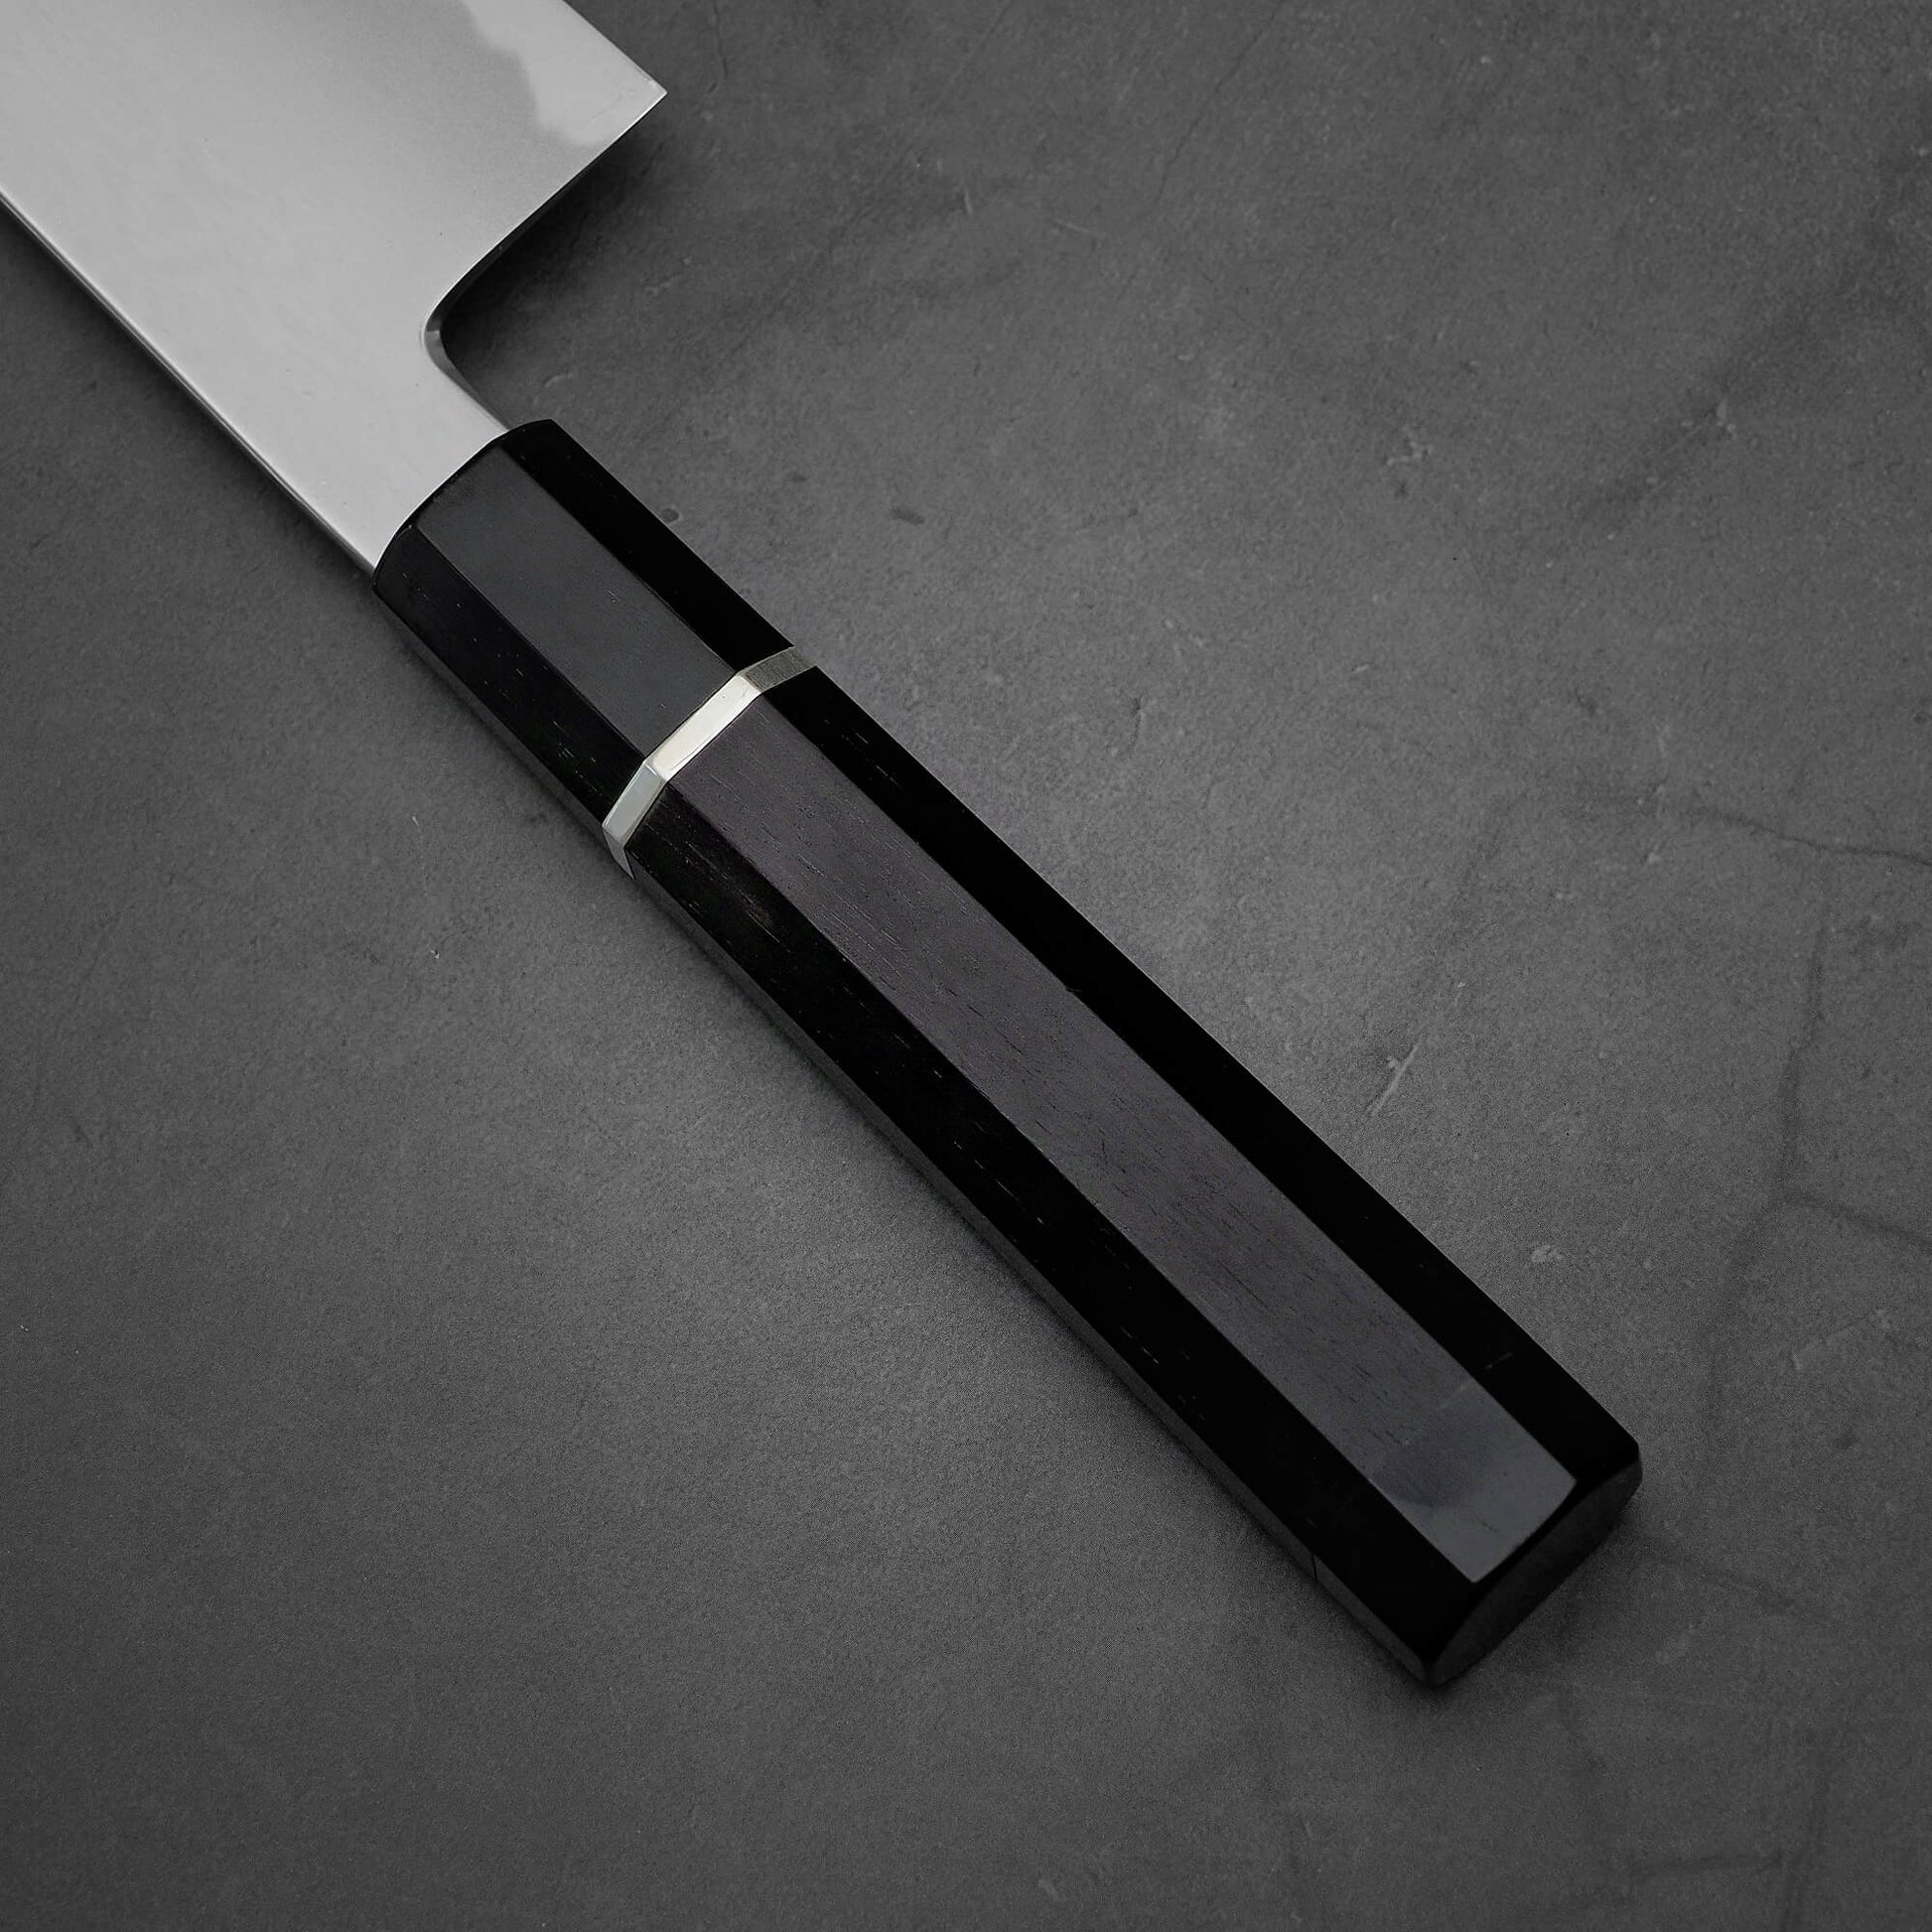 Close up view of Yoshikazu Tanaka AS bunka. This hand-forged Japanese knife is made of aogami super steel.